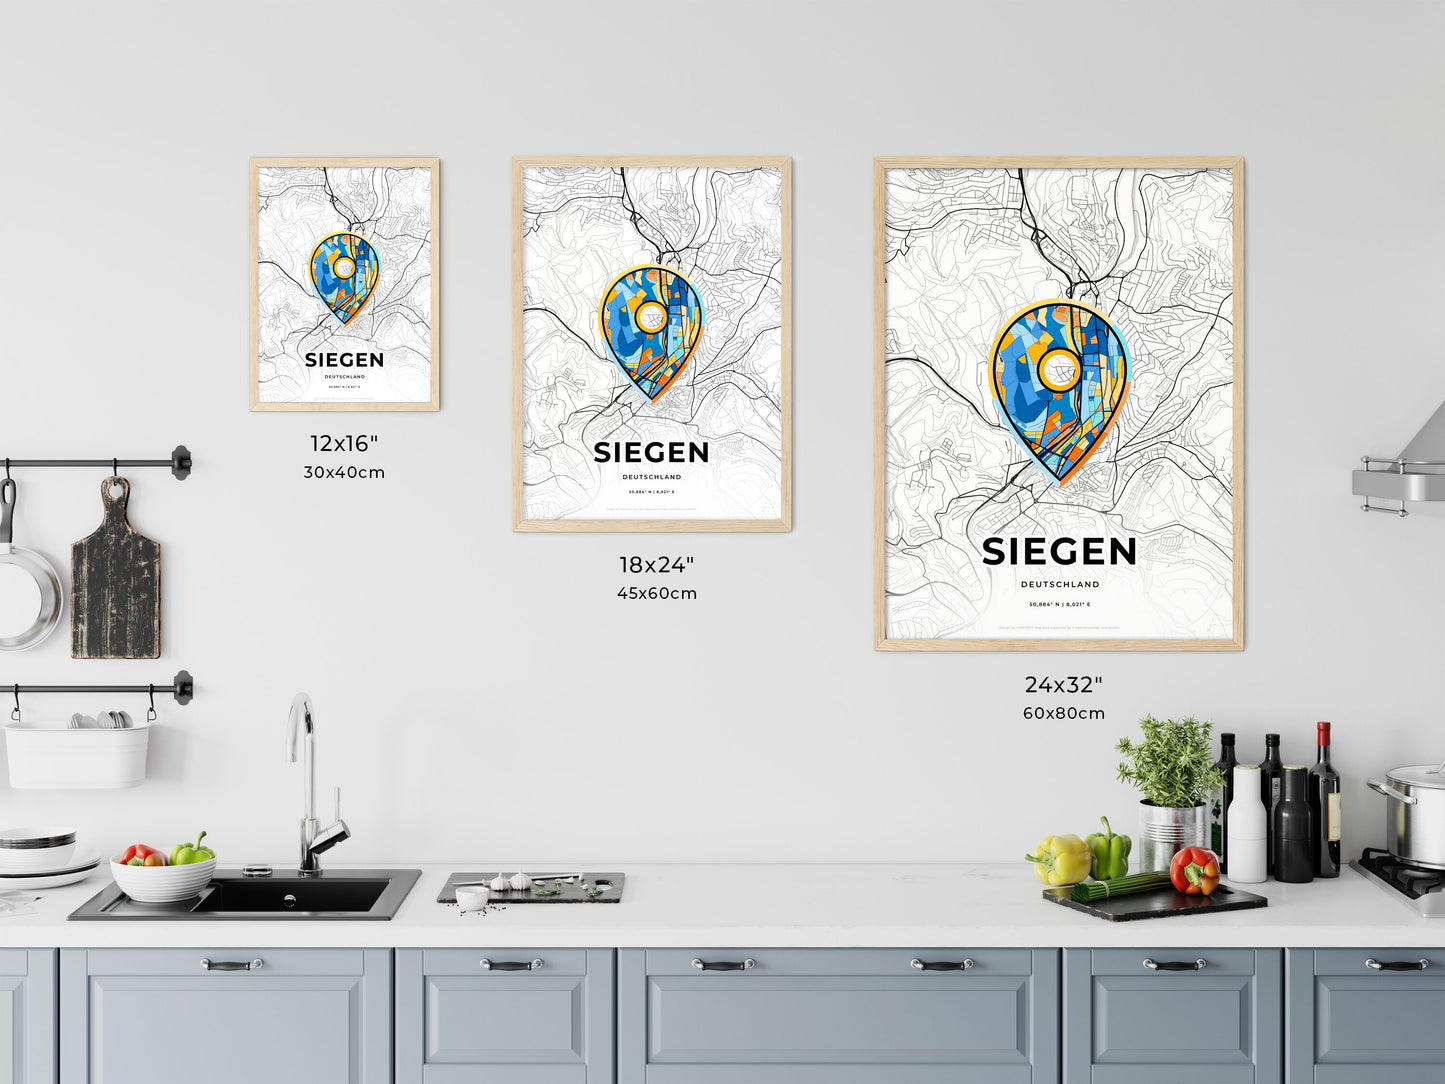 SIEGEN GERMANY minimal art map with a colorful icon. Where it all began, Couple map gift.